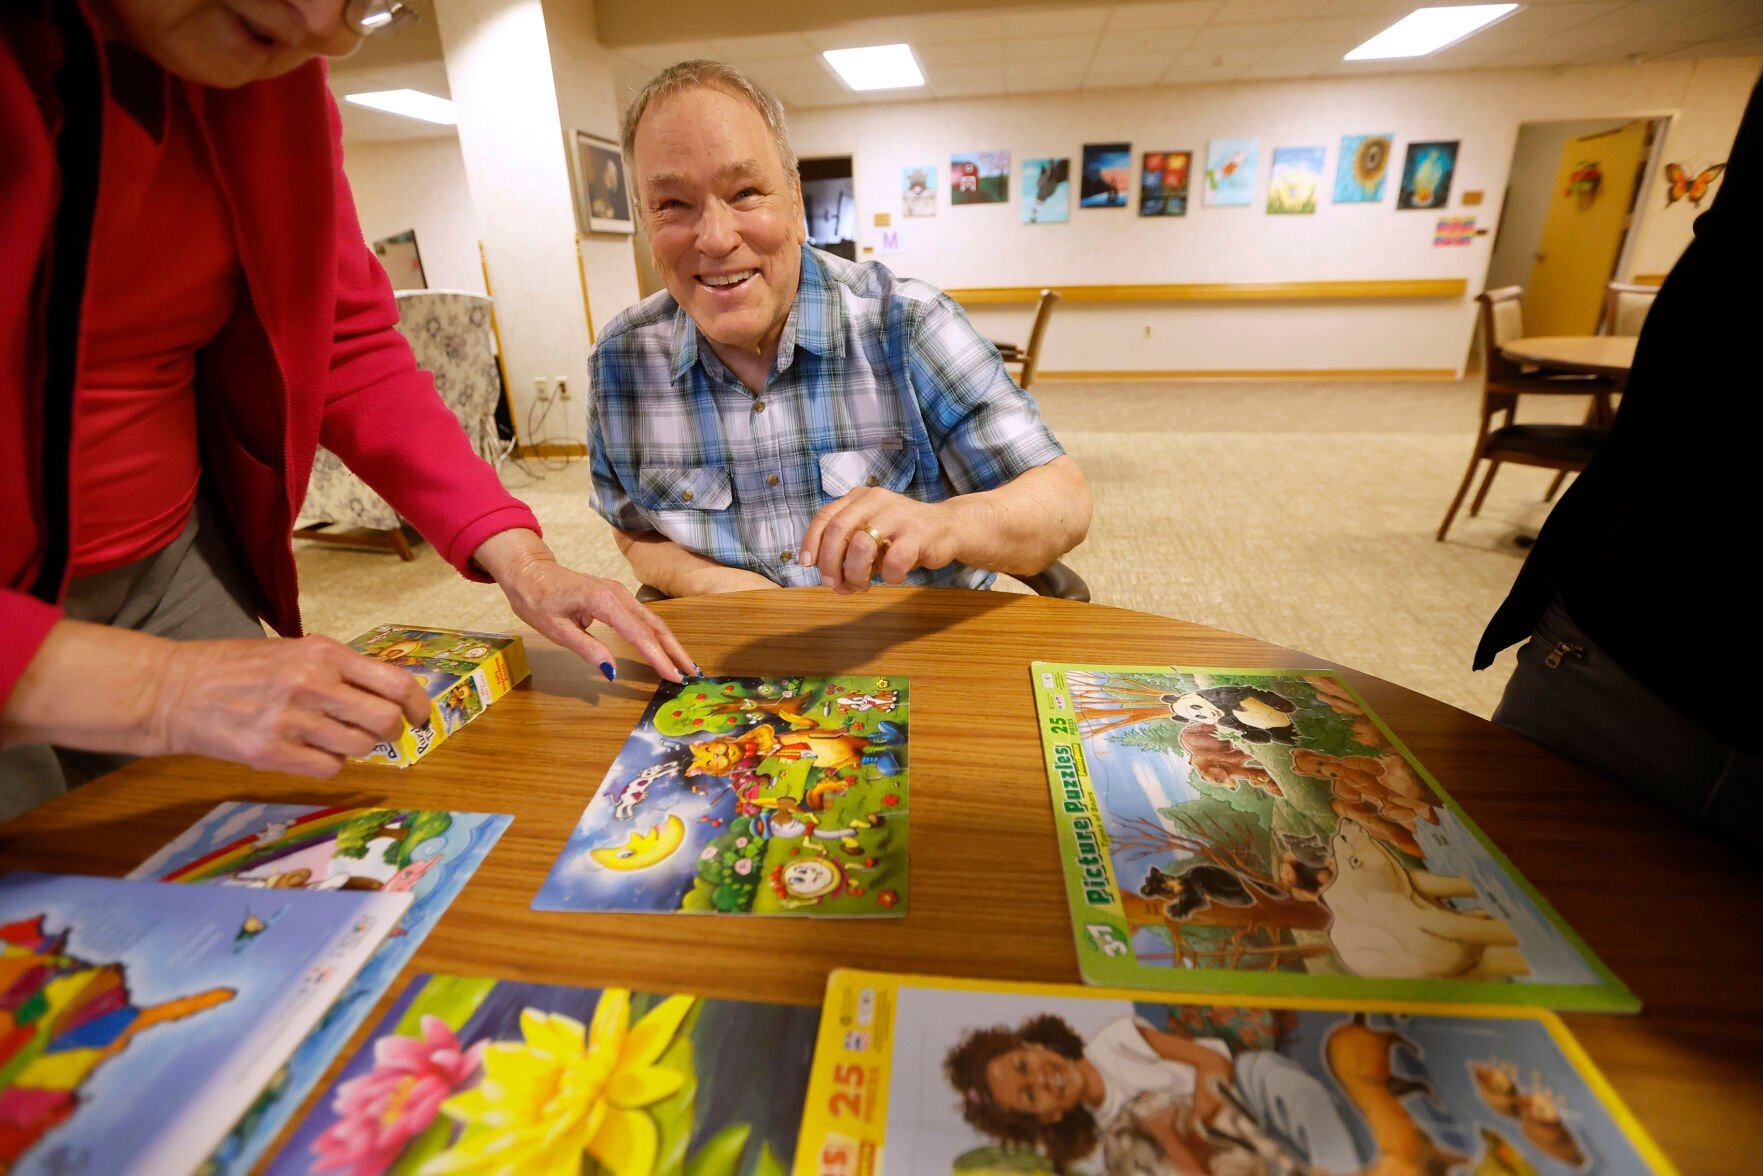 Clyde Killian works on a puzzle at Bethany Home in Dubuque.    PHOTO CREDIT: JESSICA REILLY
Telegraph Herald